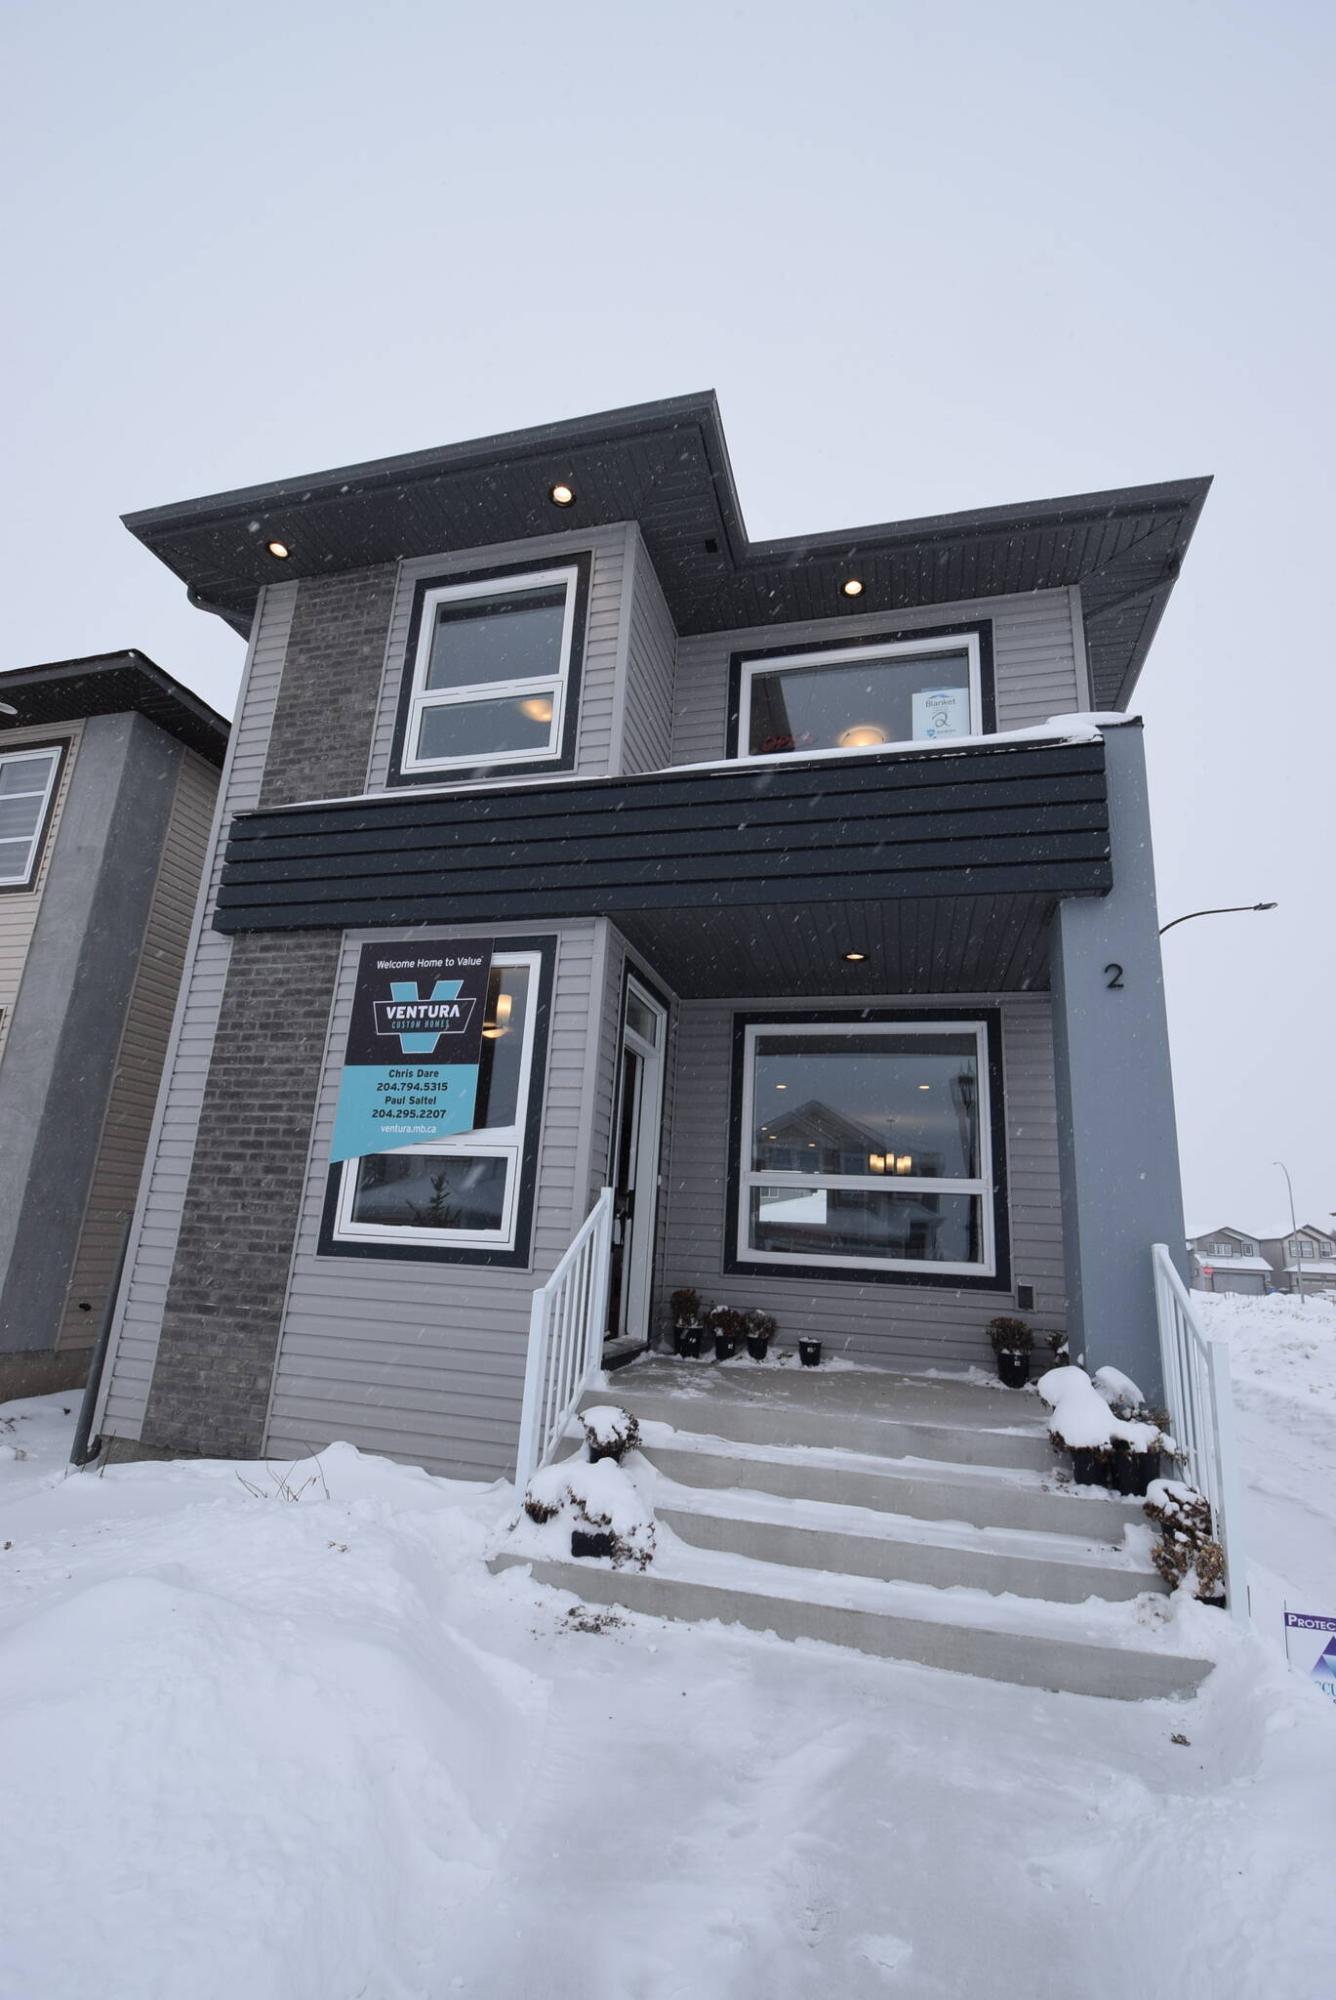  <p>Todd Lewys / Winnipeg Free Press</p>
                                <p>The 1,665 square-foot, two-storey Drake is proof positive that a mid-sized plan can offer exceptional livability and style.</p> 